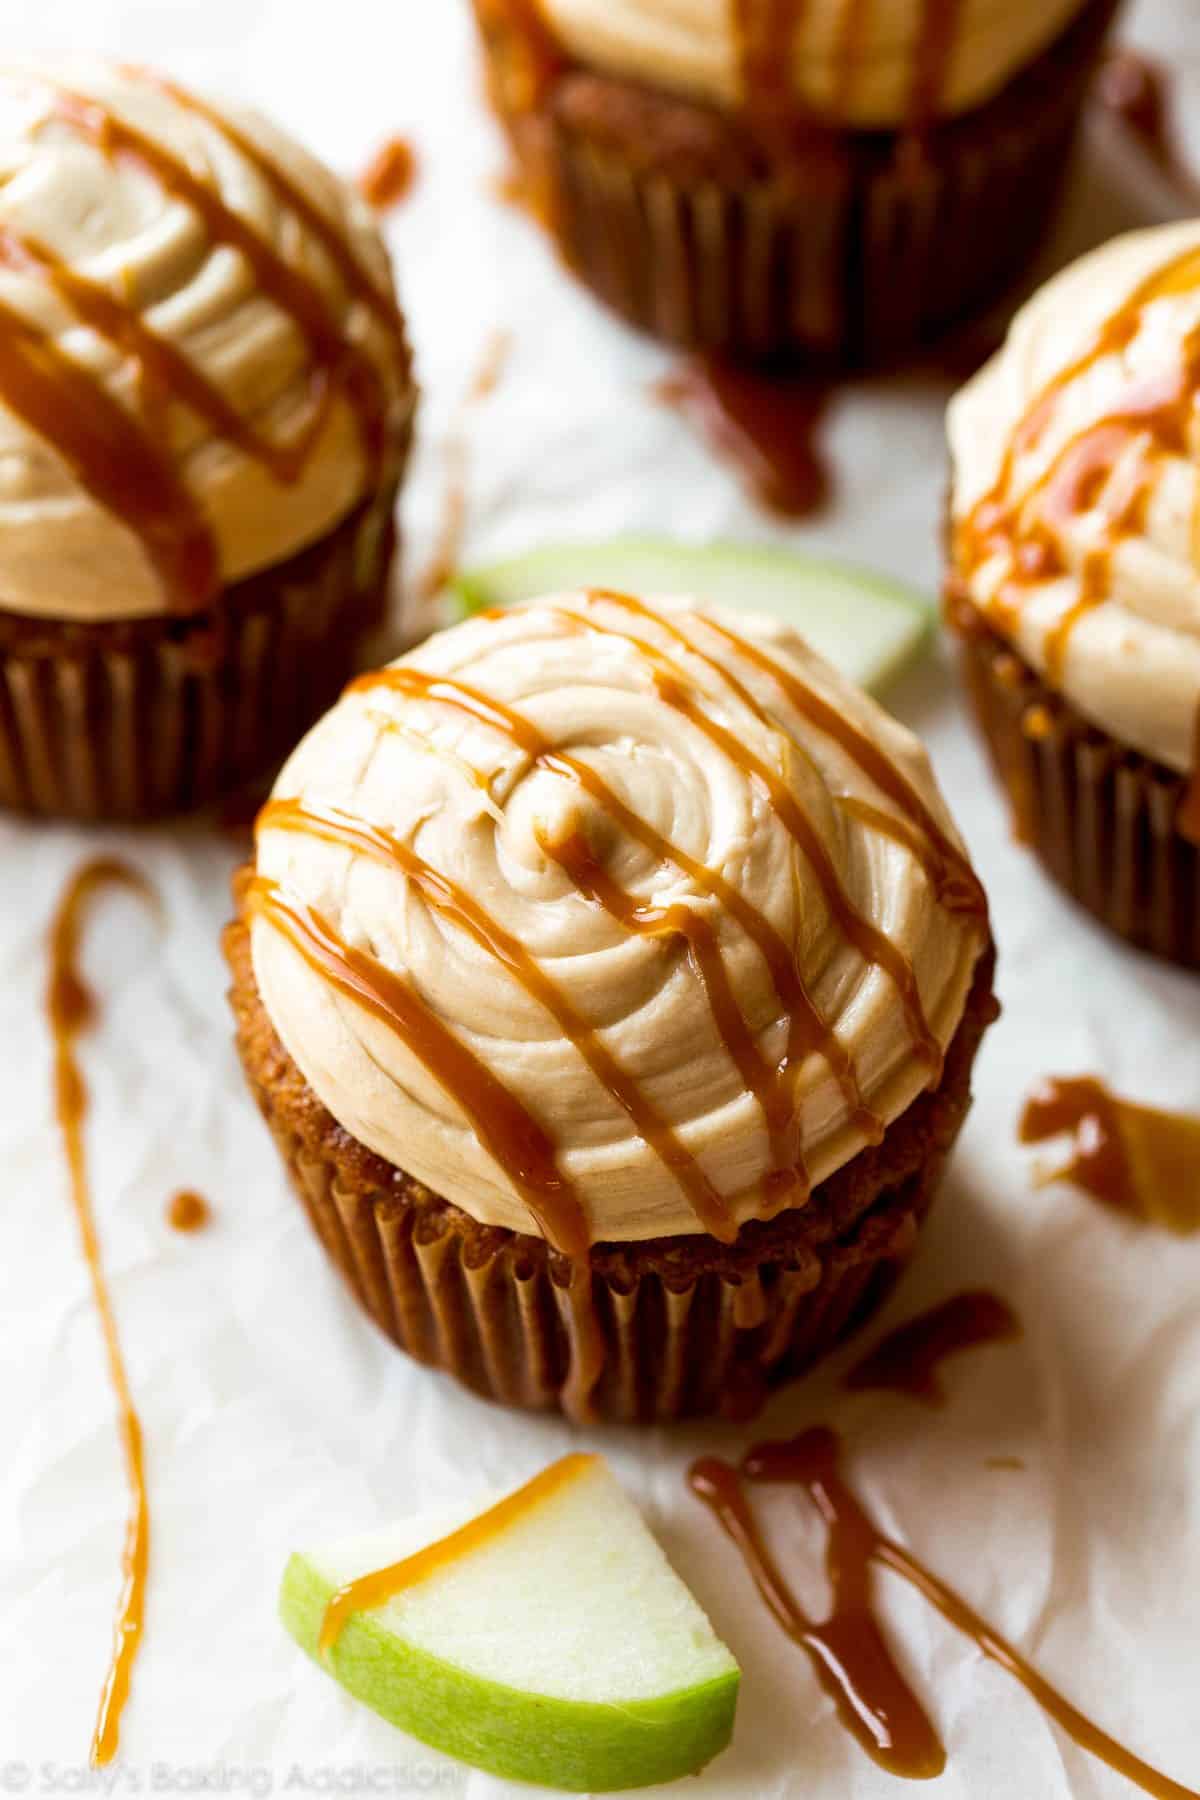 apple spice cupcakes topped with salted caramel frosting and a drizzle of salted caramel